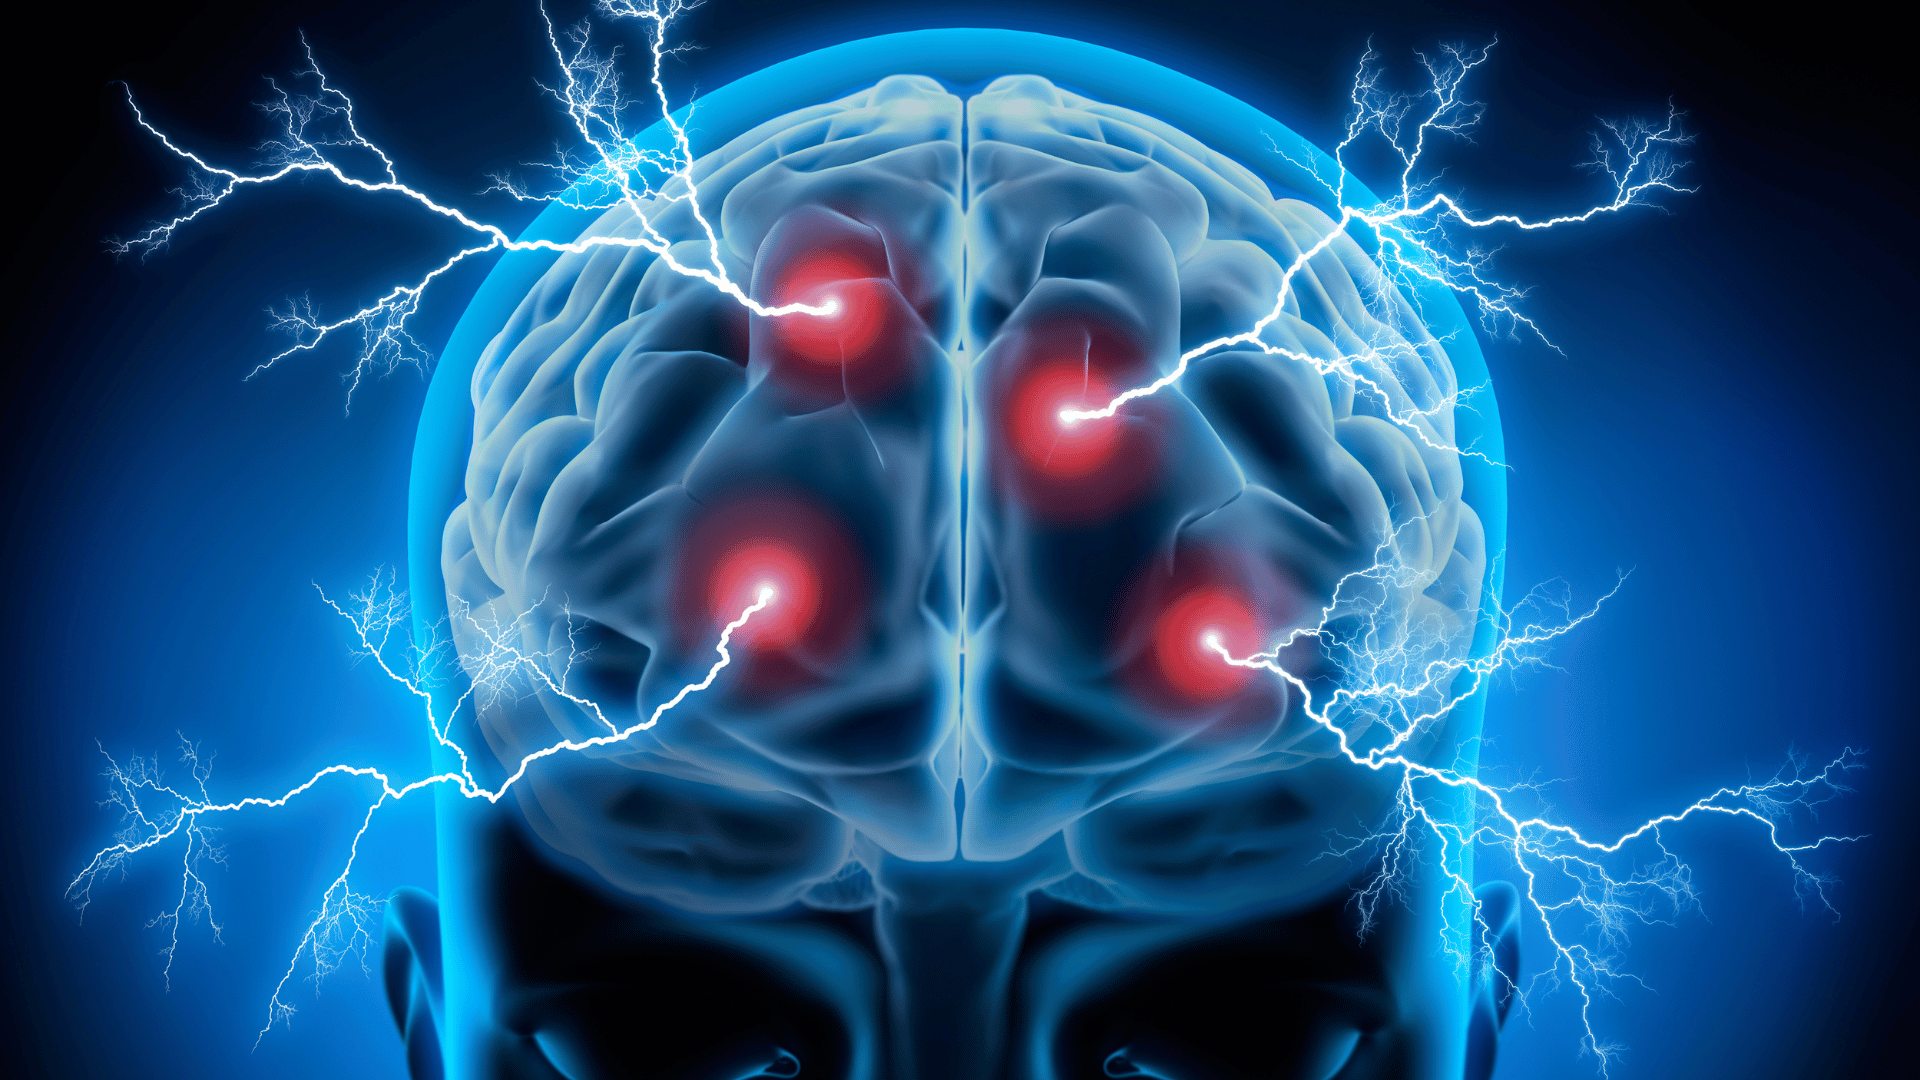 Scientific-like illustration of electrical currents entering a person's brain through several ports